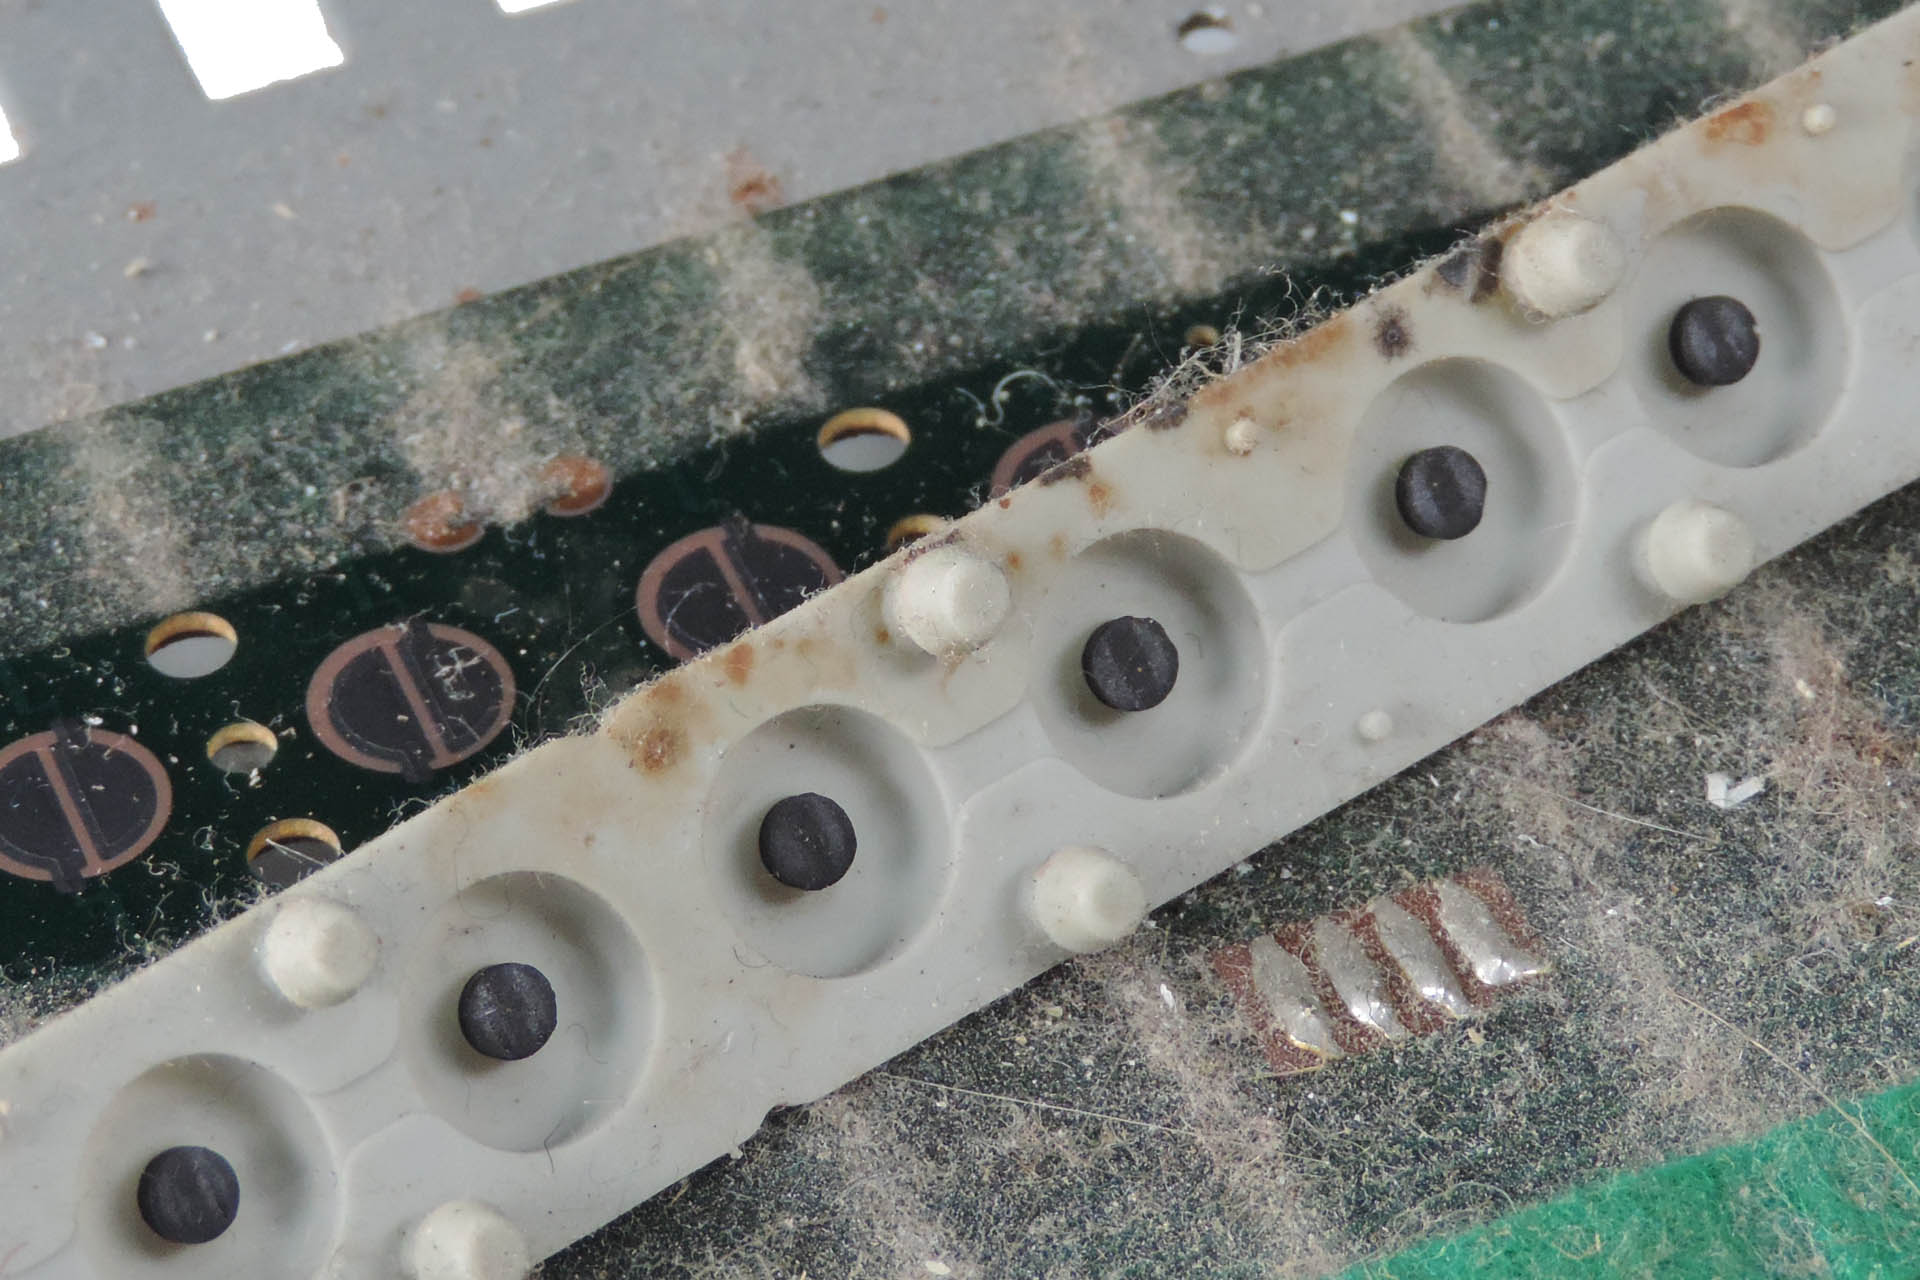 Keyboard contact strip after decades of neglect